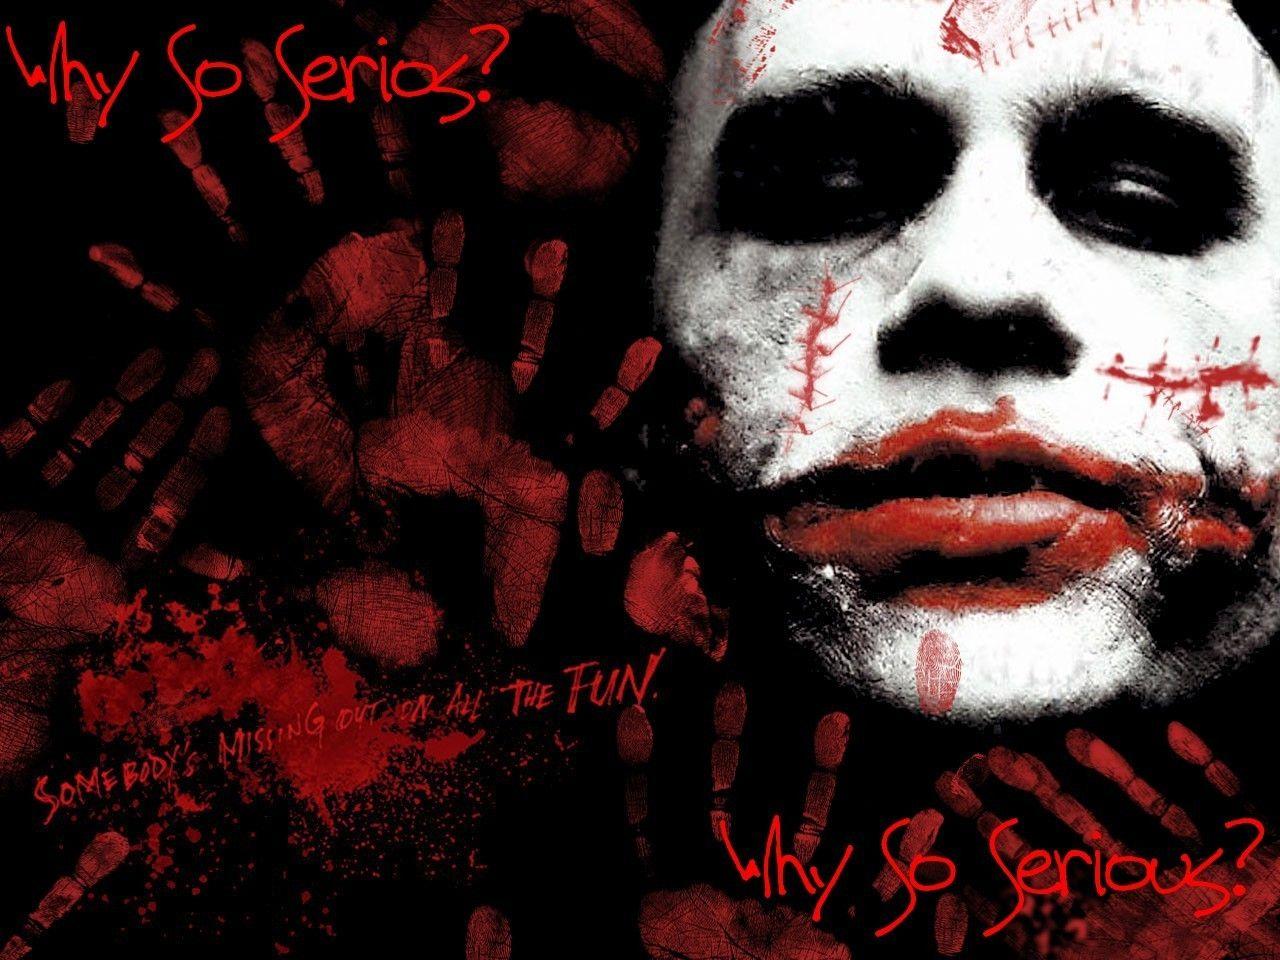 Joker We Are All Clowns Wallpapers